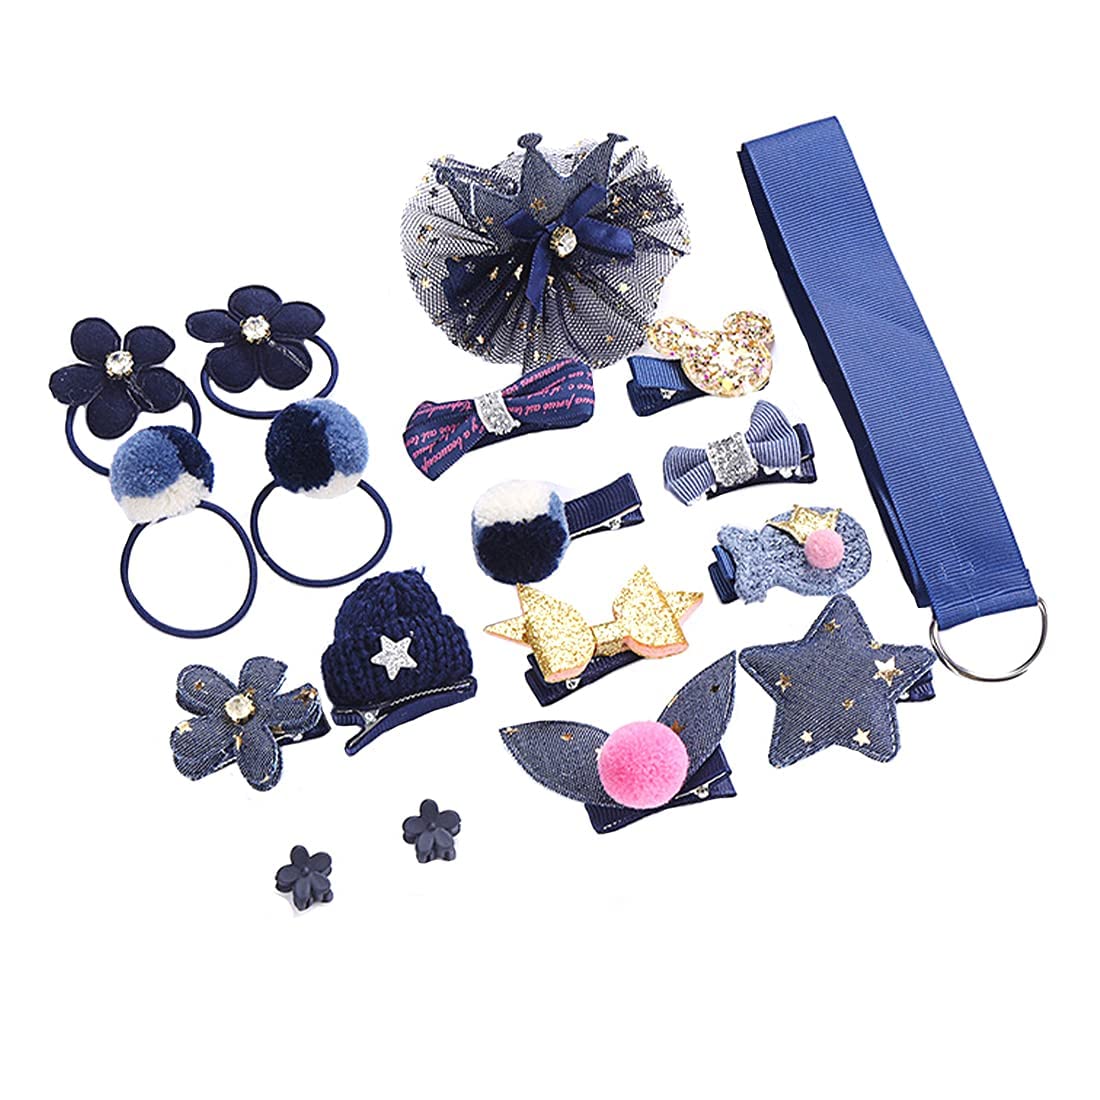 Melbees by Yellow Chimes 18 Pcs Set of Hair Accessories for Kids with Dark Blue Color Hair Clips and Hair Band Assortment Gift Set for Kids Girls (Pack of 18)